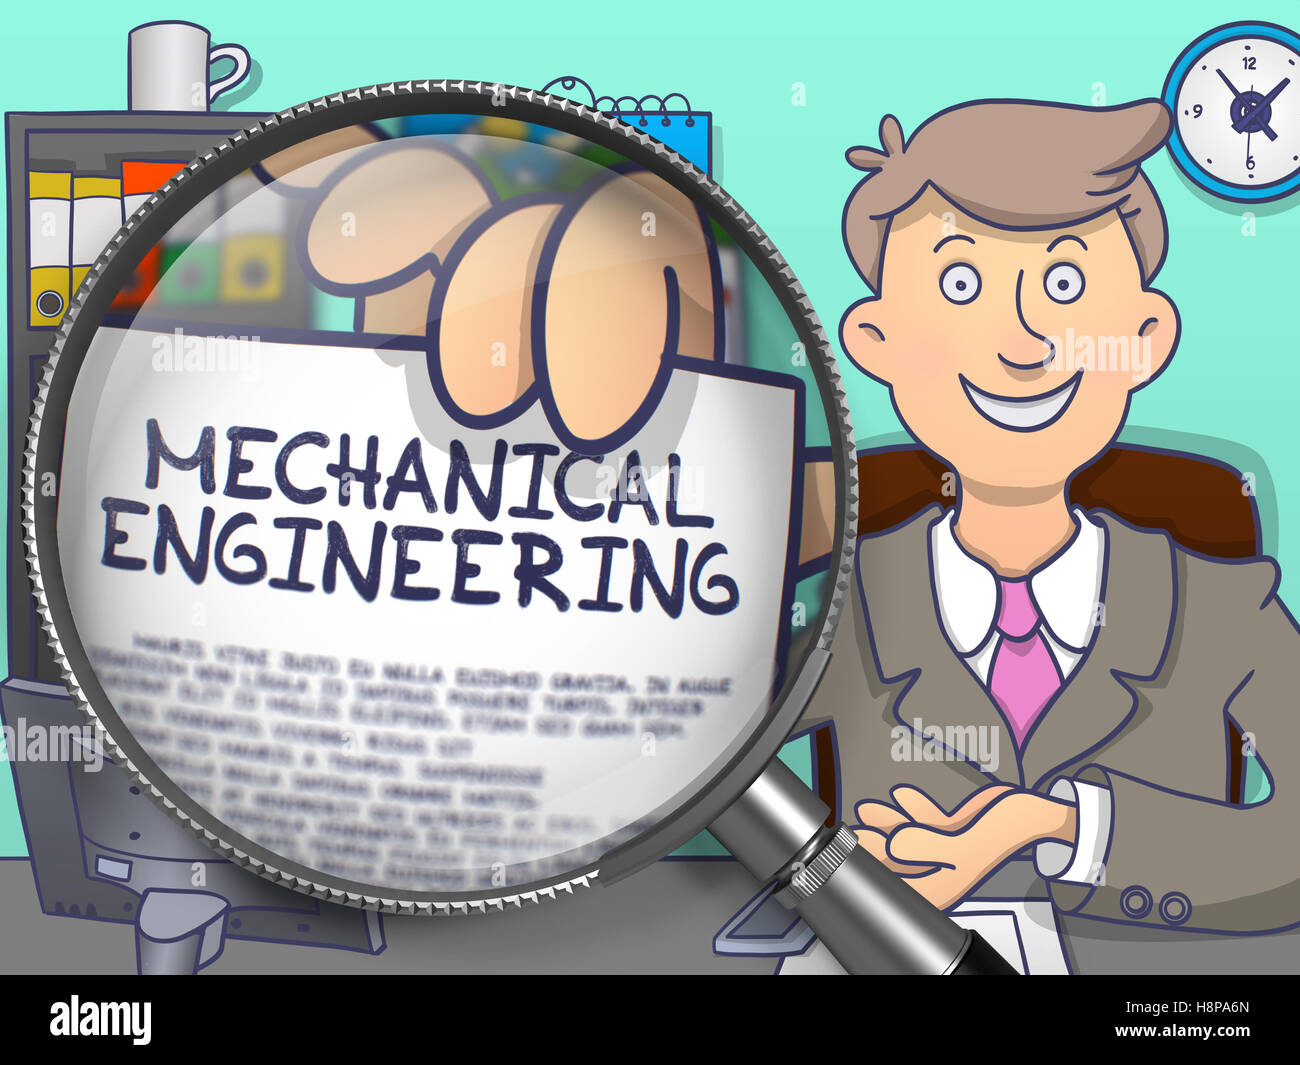 Mechanical Engineering through Lens. Doodle Style. Stock Photo